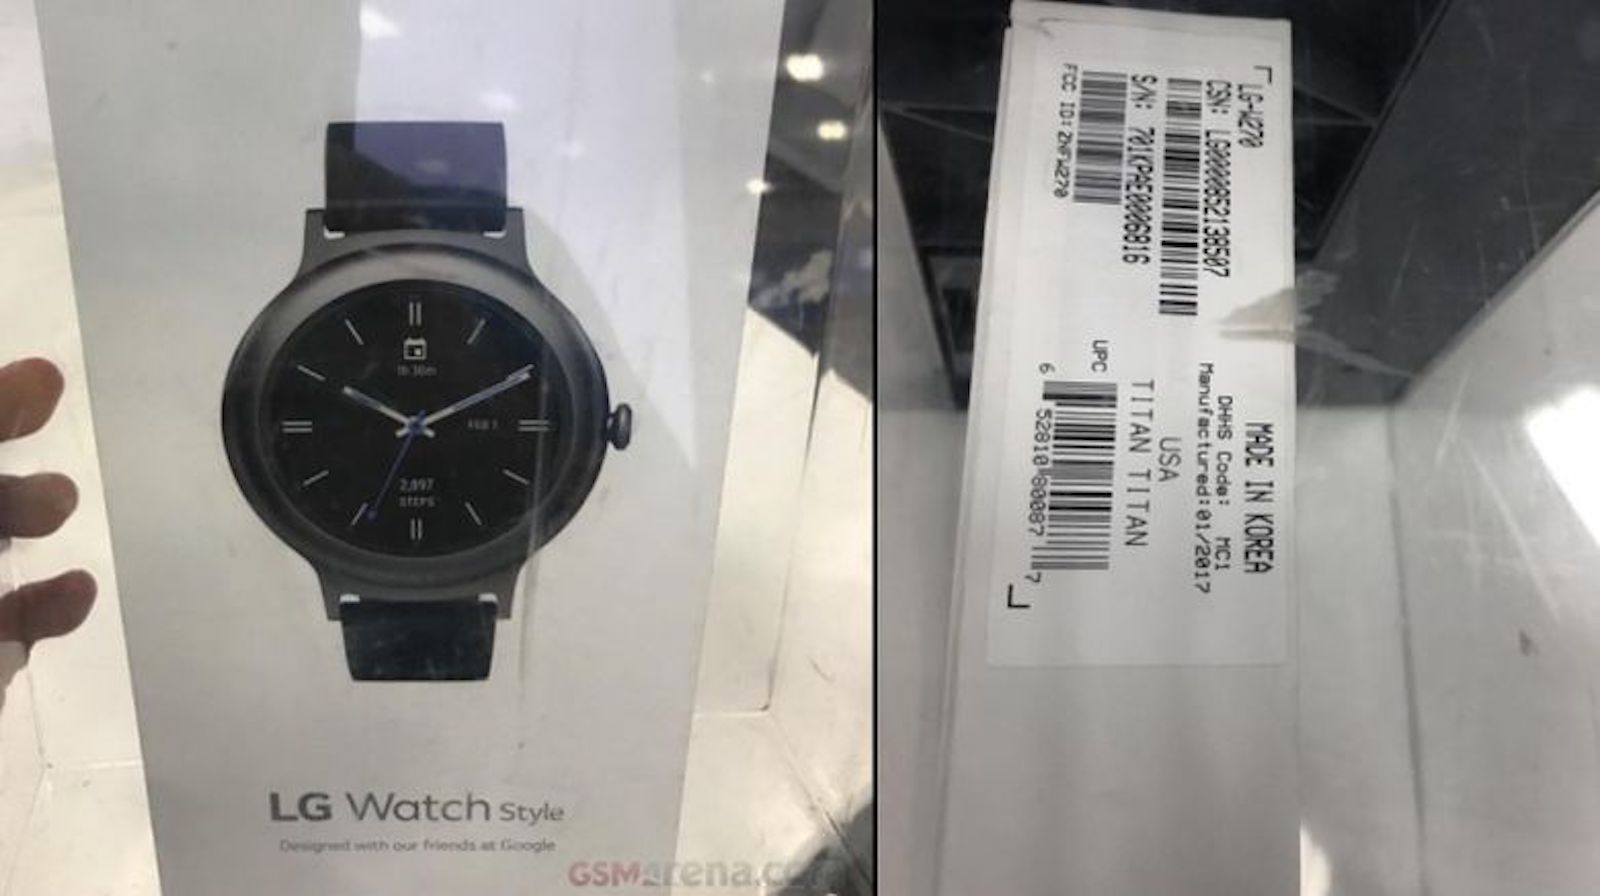 lg watch style design confirmed in leaked photo watch sport to get quad core processor image 1